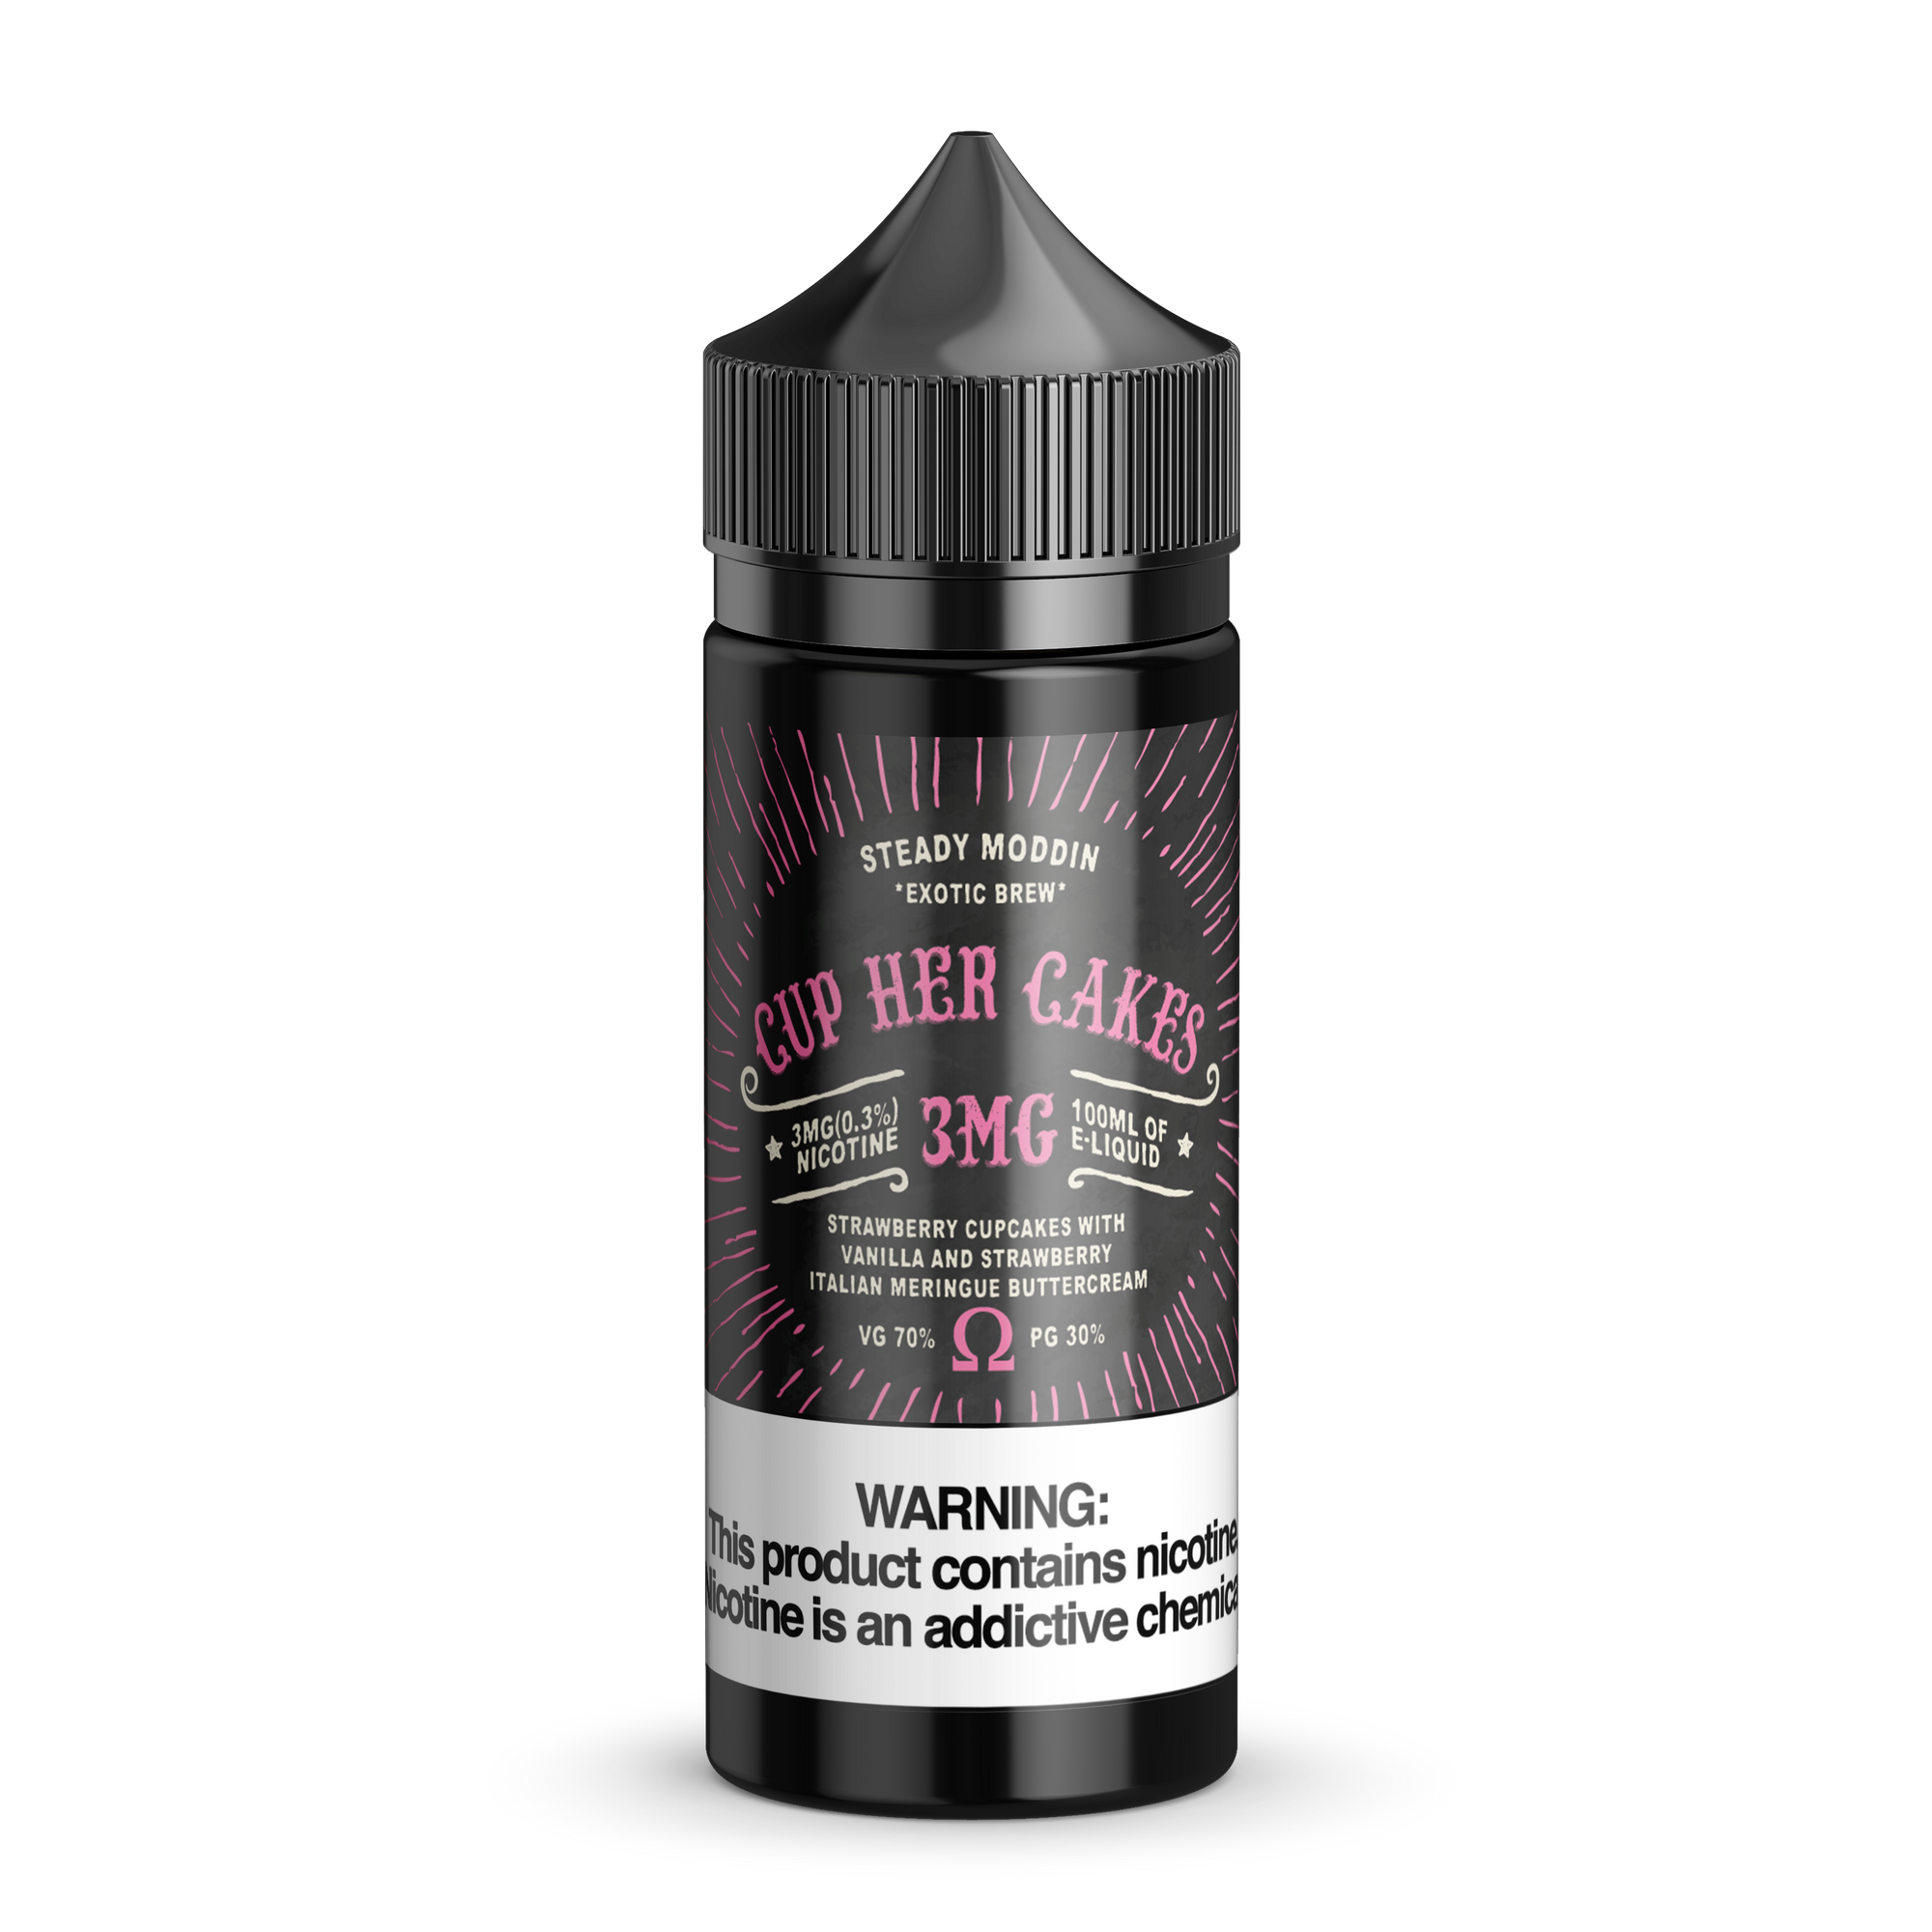 100ML | Cup Her Cakes by Steady Moddin's Exotic Brew